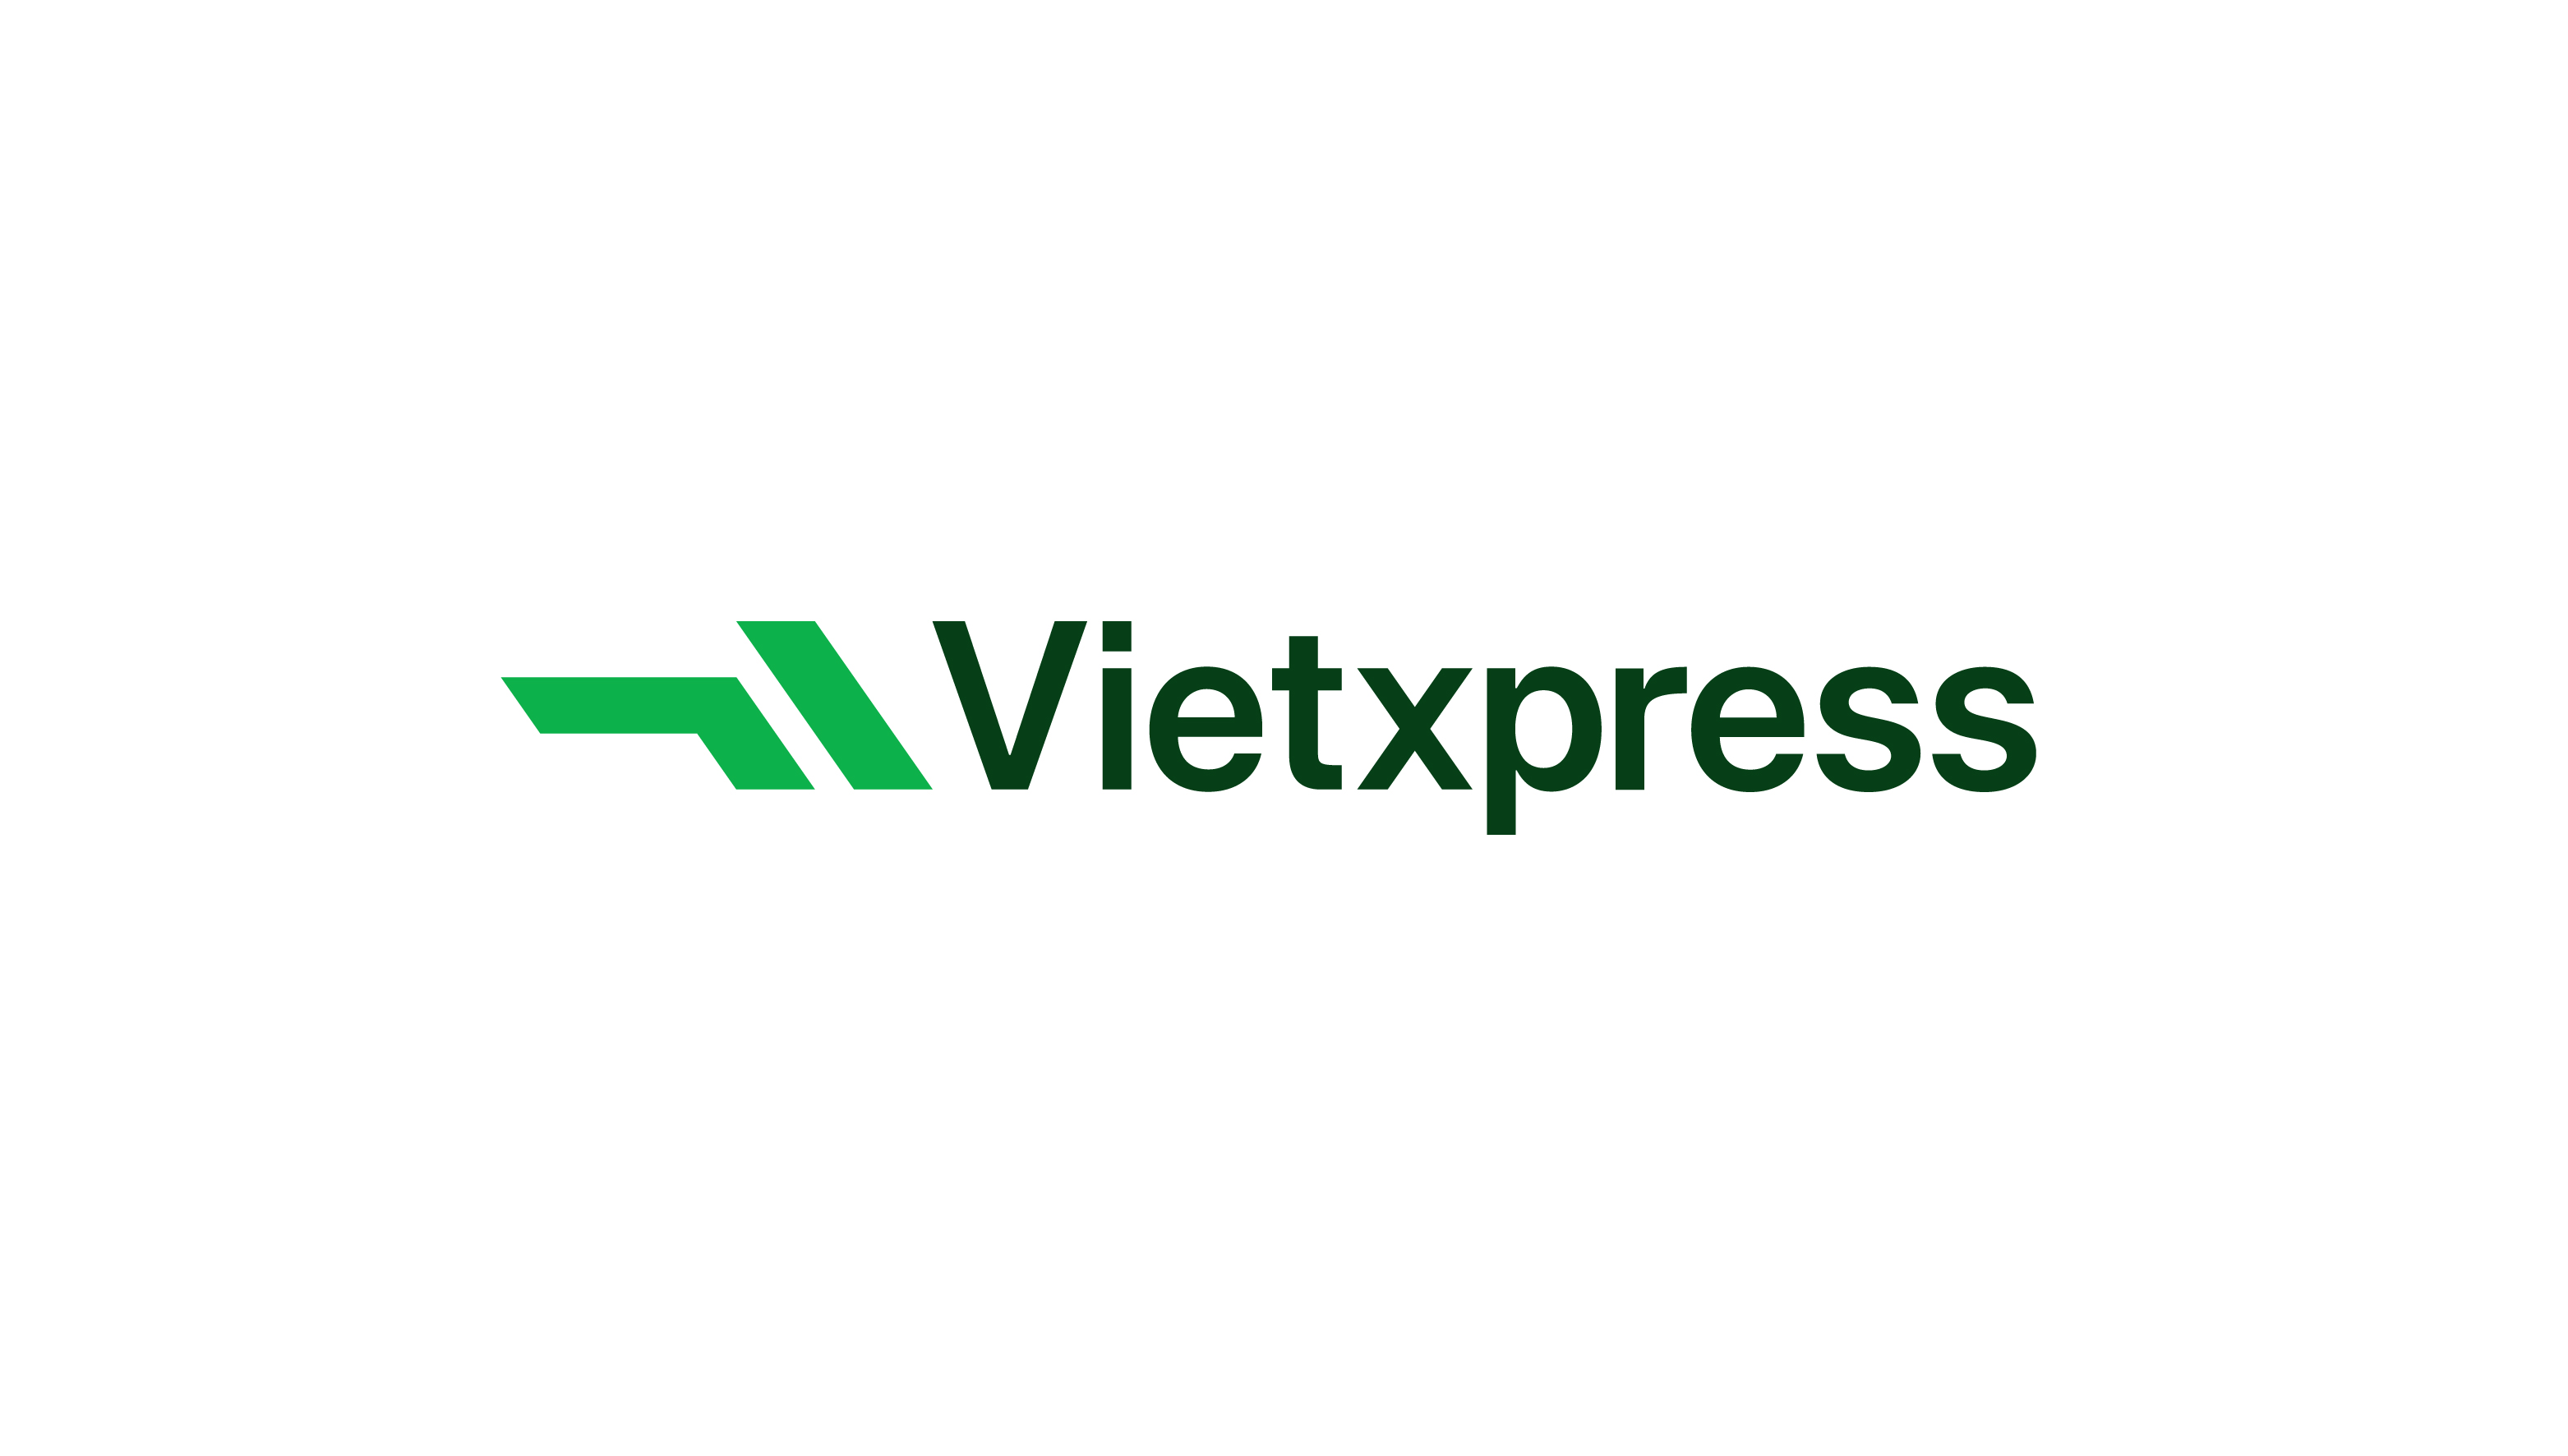 Vietxpress Unveils Bold New Brand Identity with Iconic Logomark by LINH V.